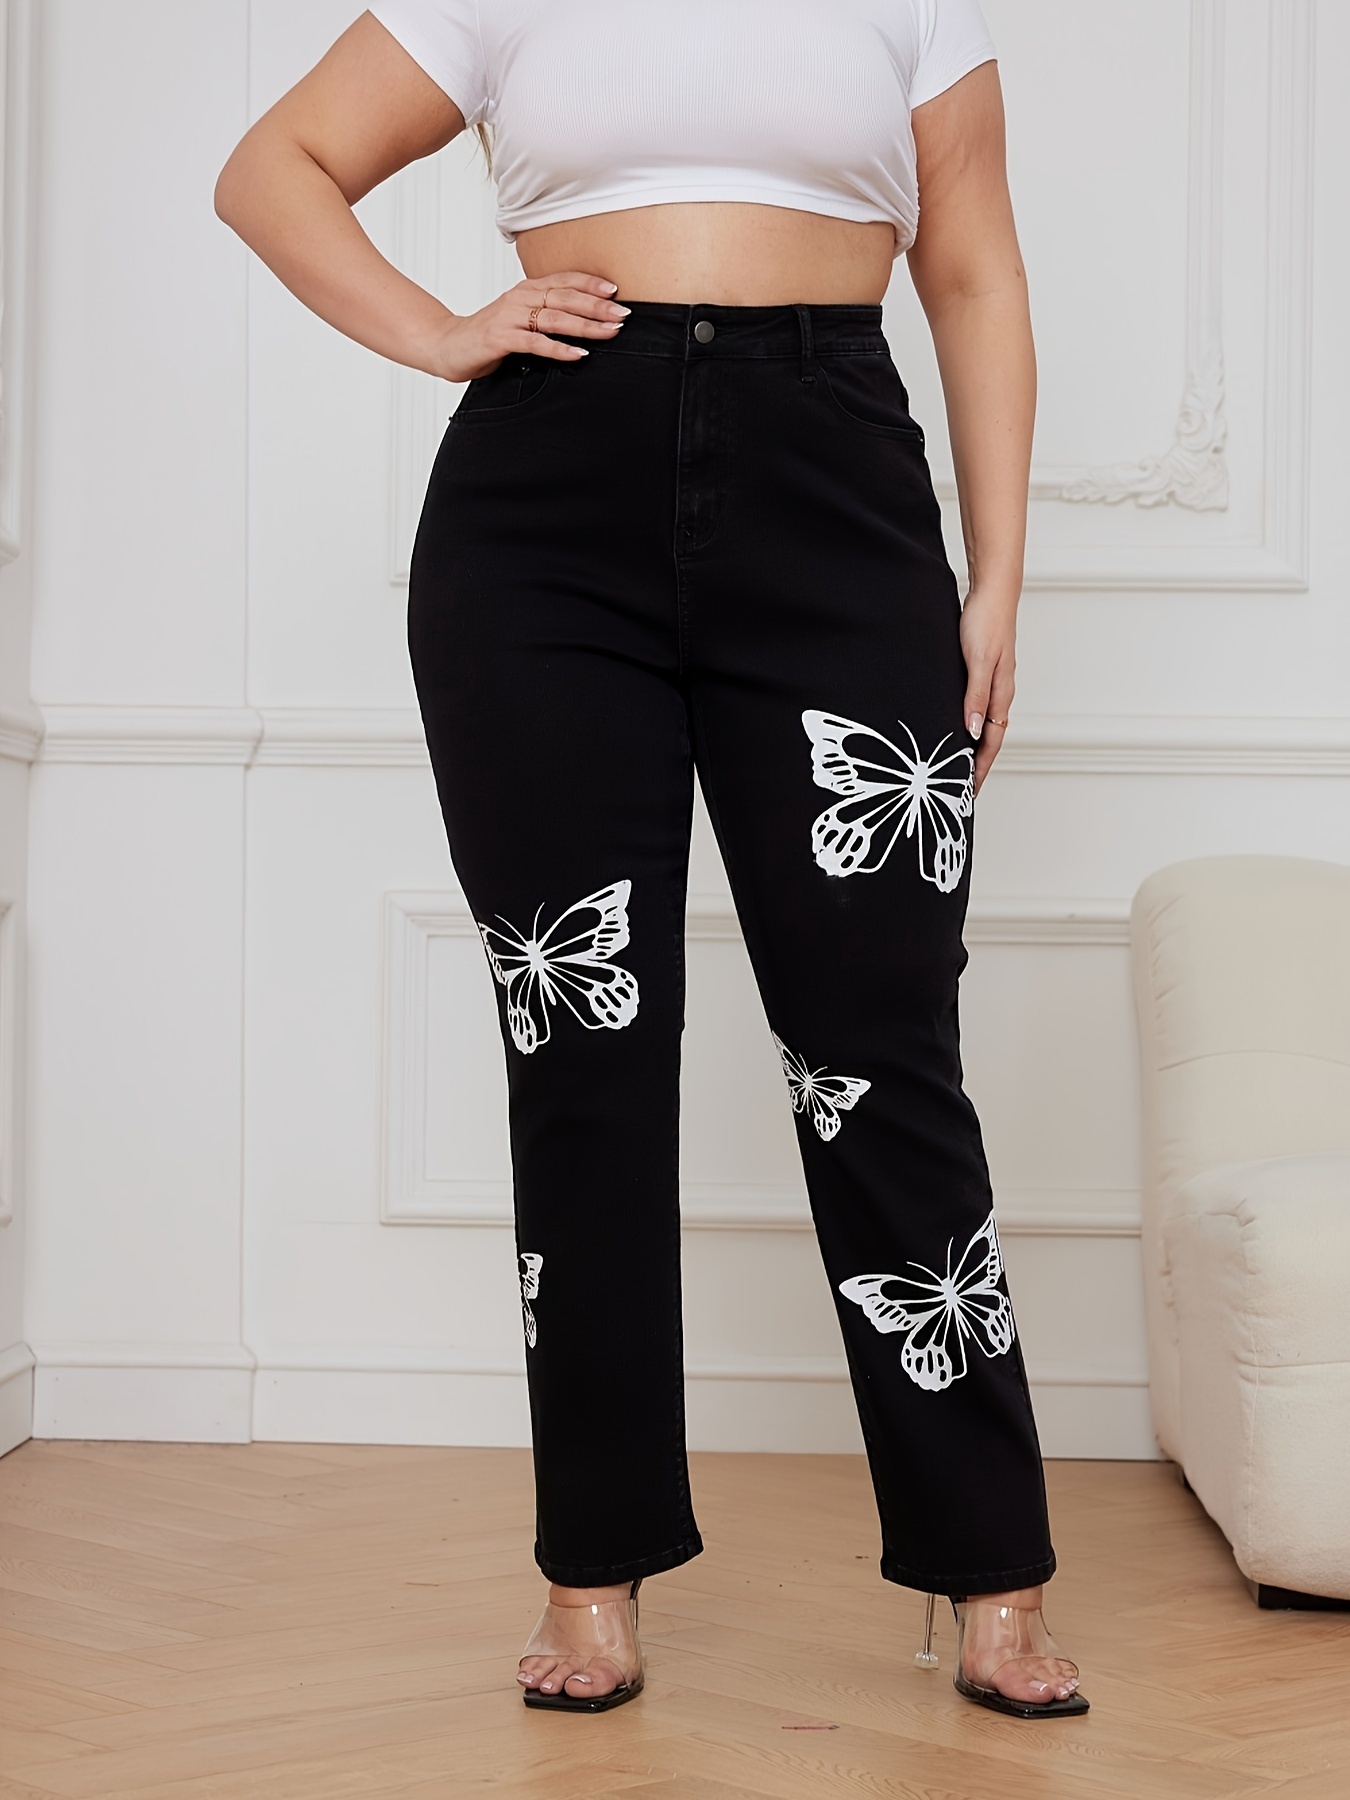  Bell Bottom Jeans Women Floral Embroidered Jeans Stretch  High Waisted Flare Jean Button Fly Y2K Wide Leg Denim Pants